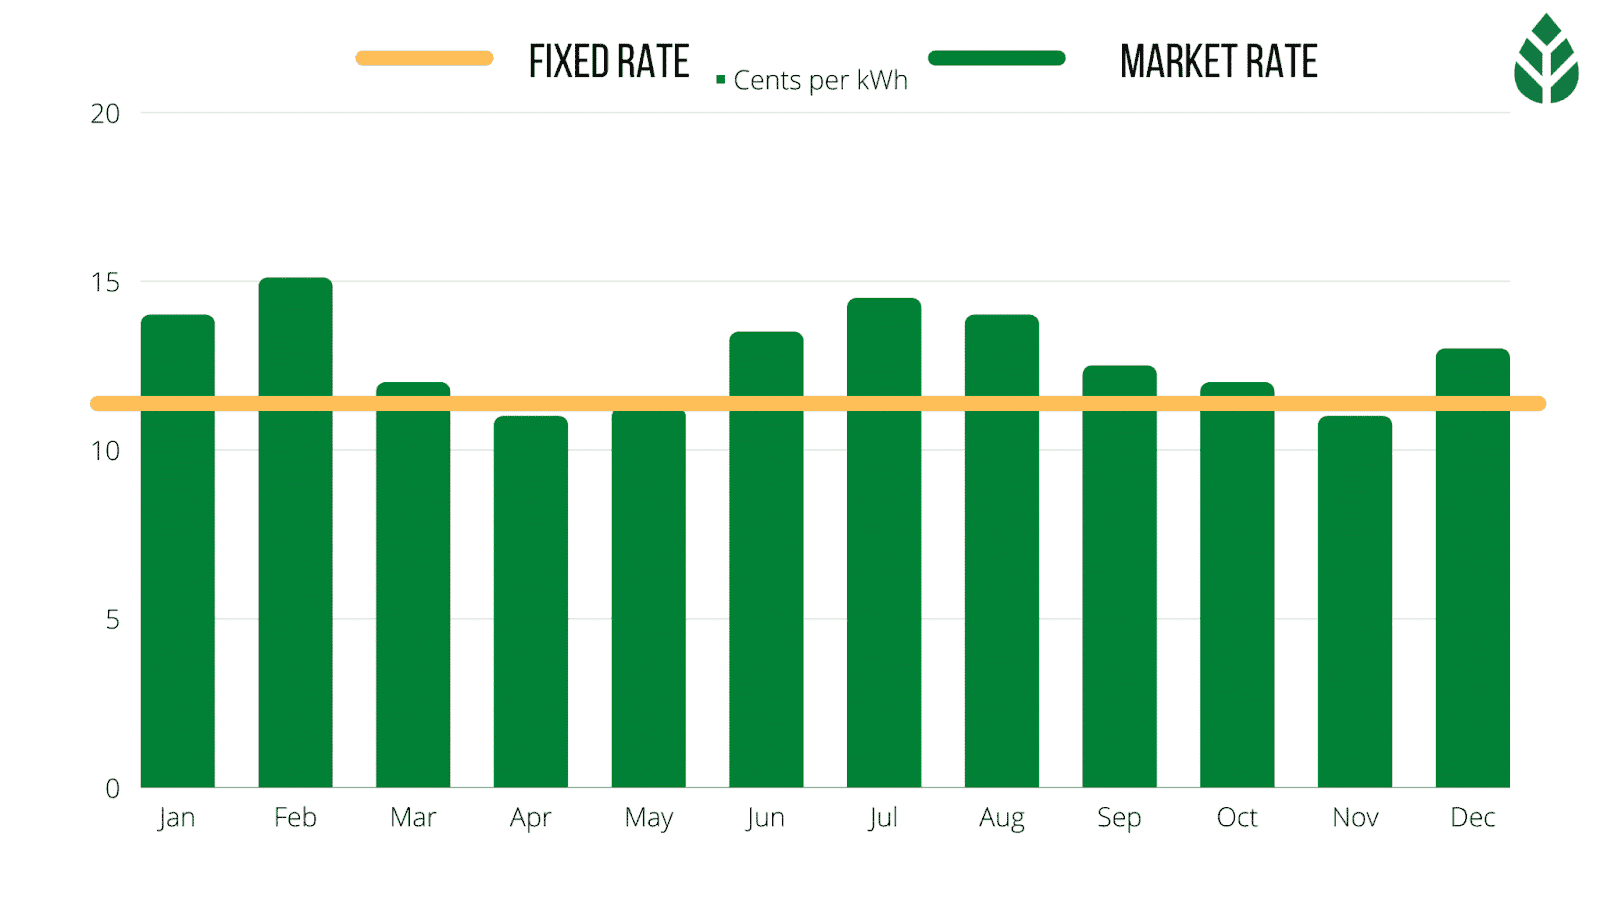 Fixed Rate vs Market Rate Electricity Rates in Houston by Month